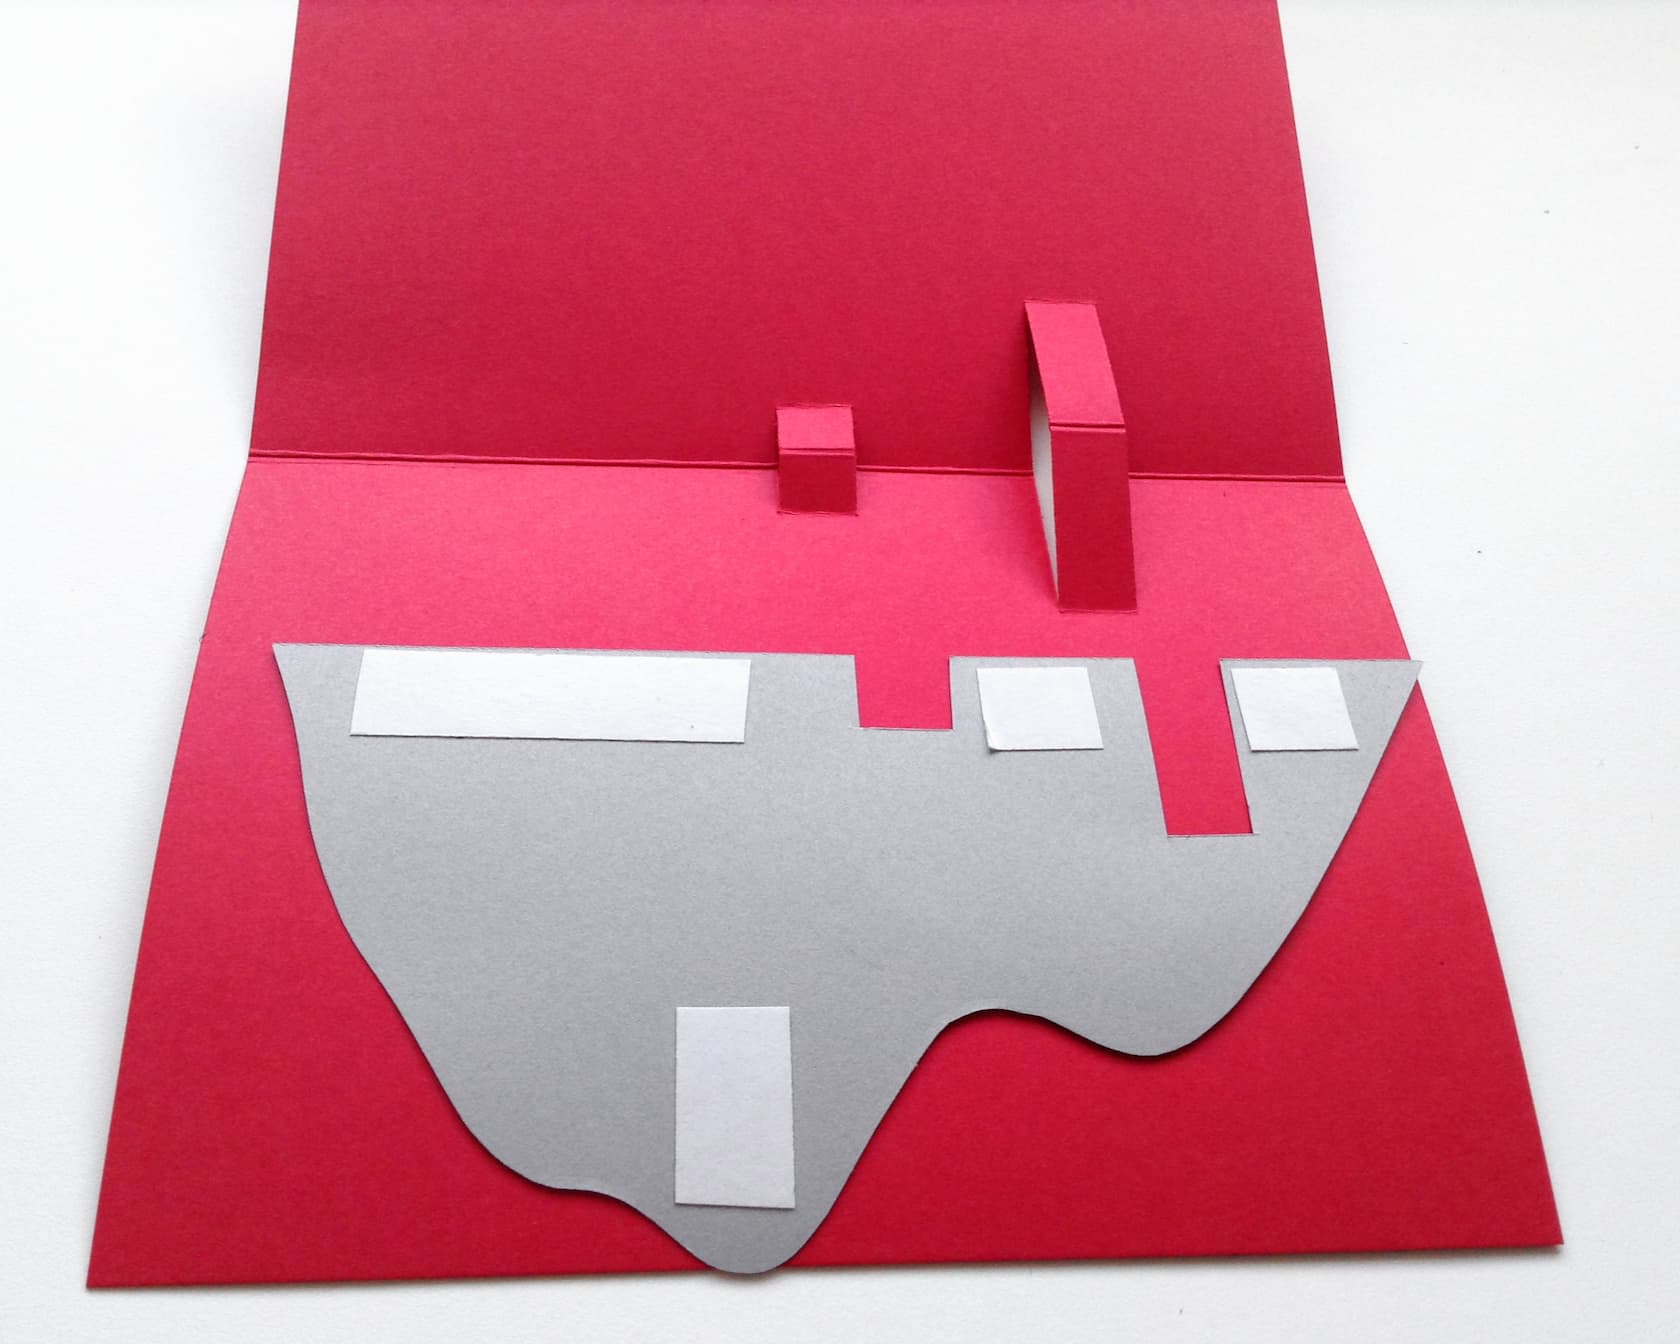 Apply double-sided sticky tape and place flat onto the Valentine's card